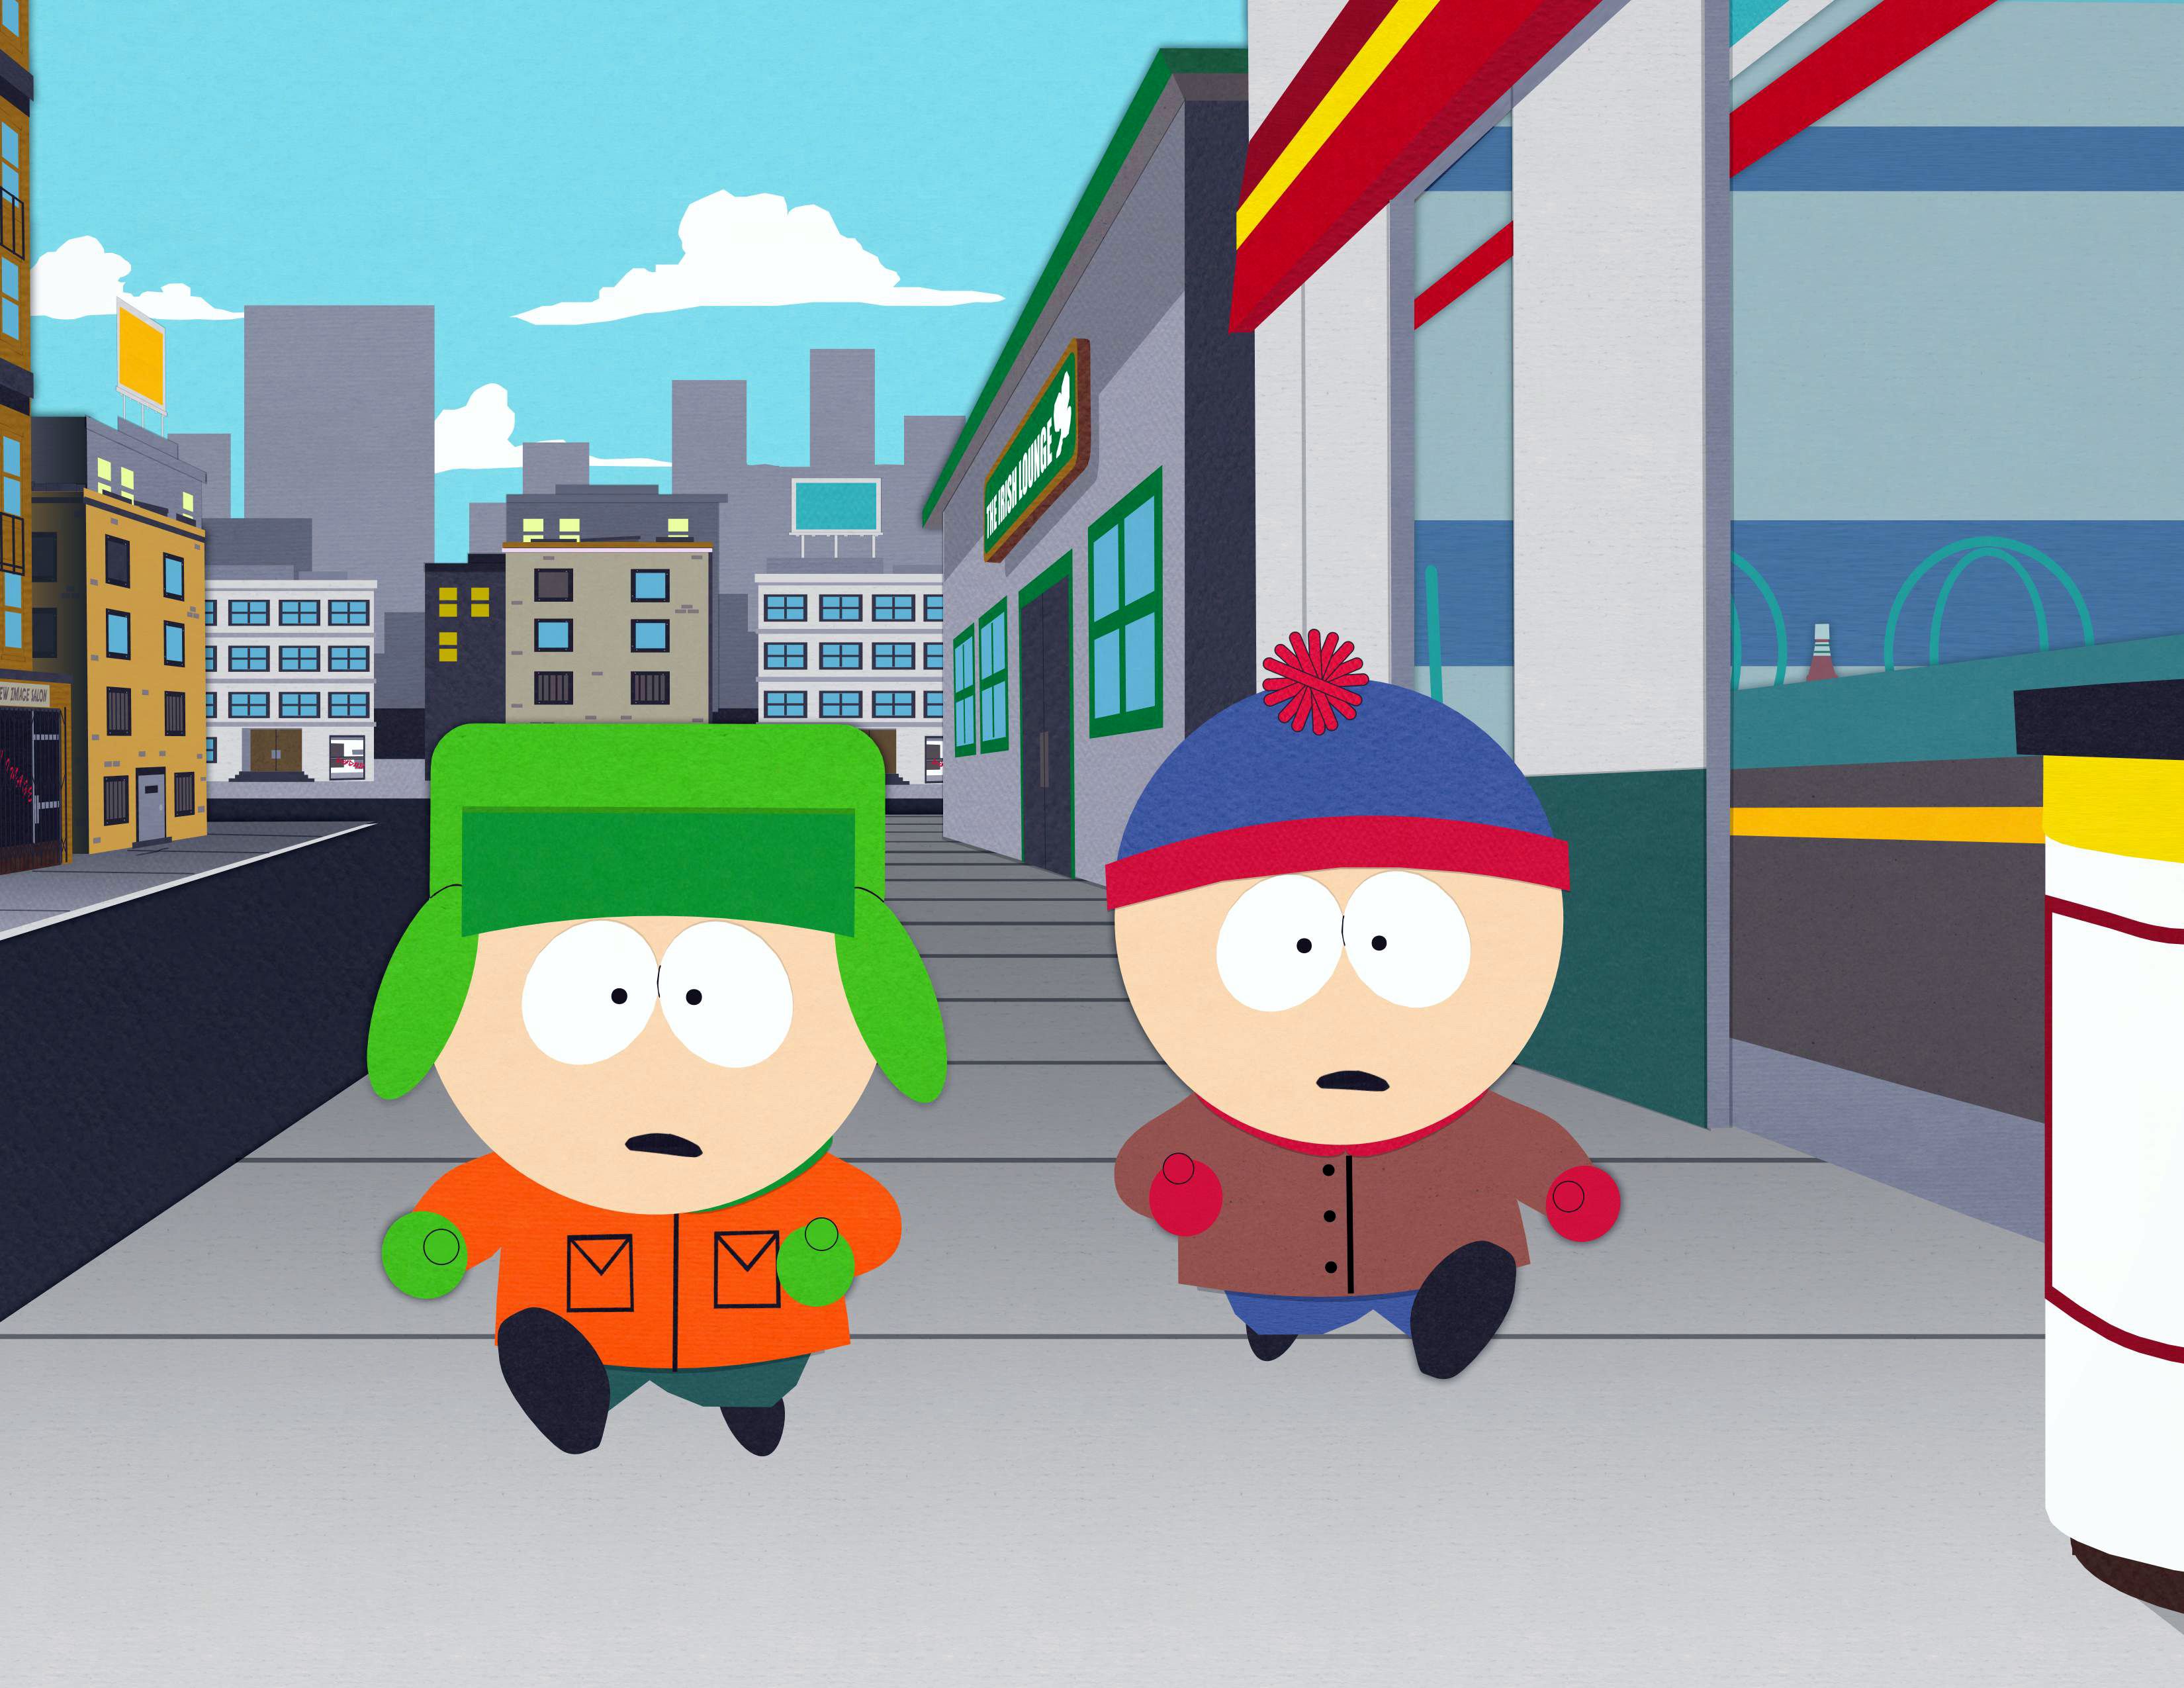 South Park: Stan and Kyle run down the street